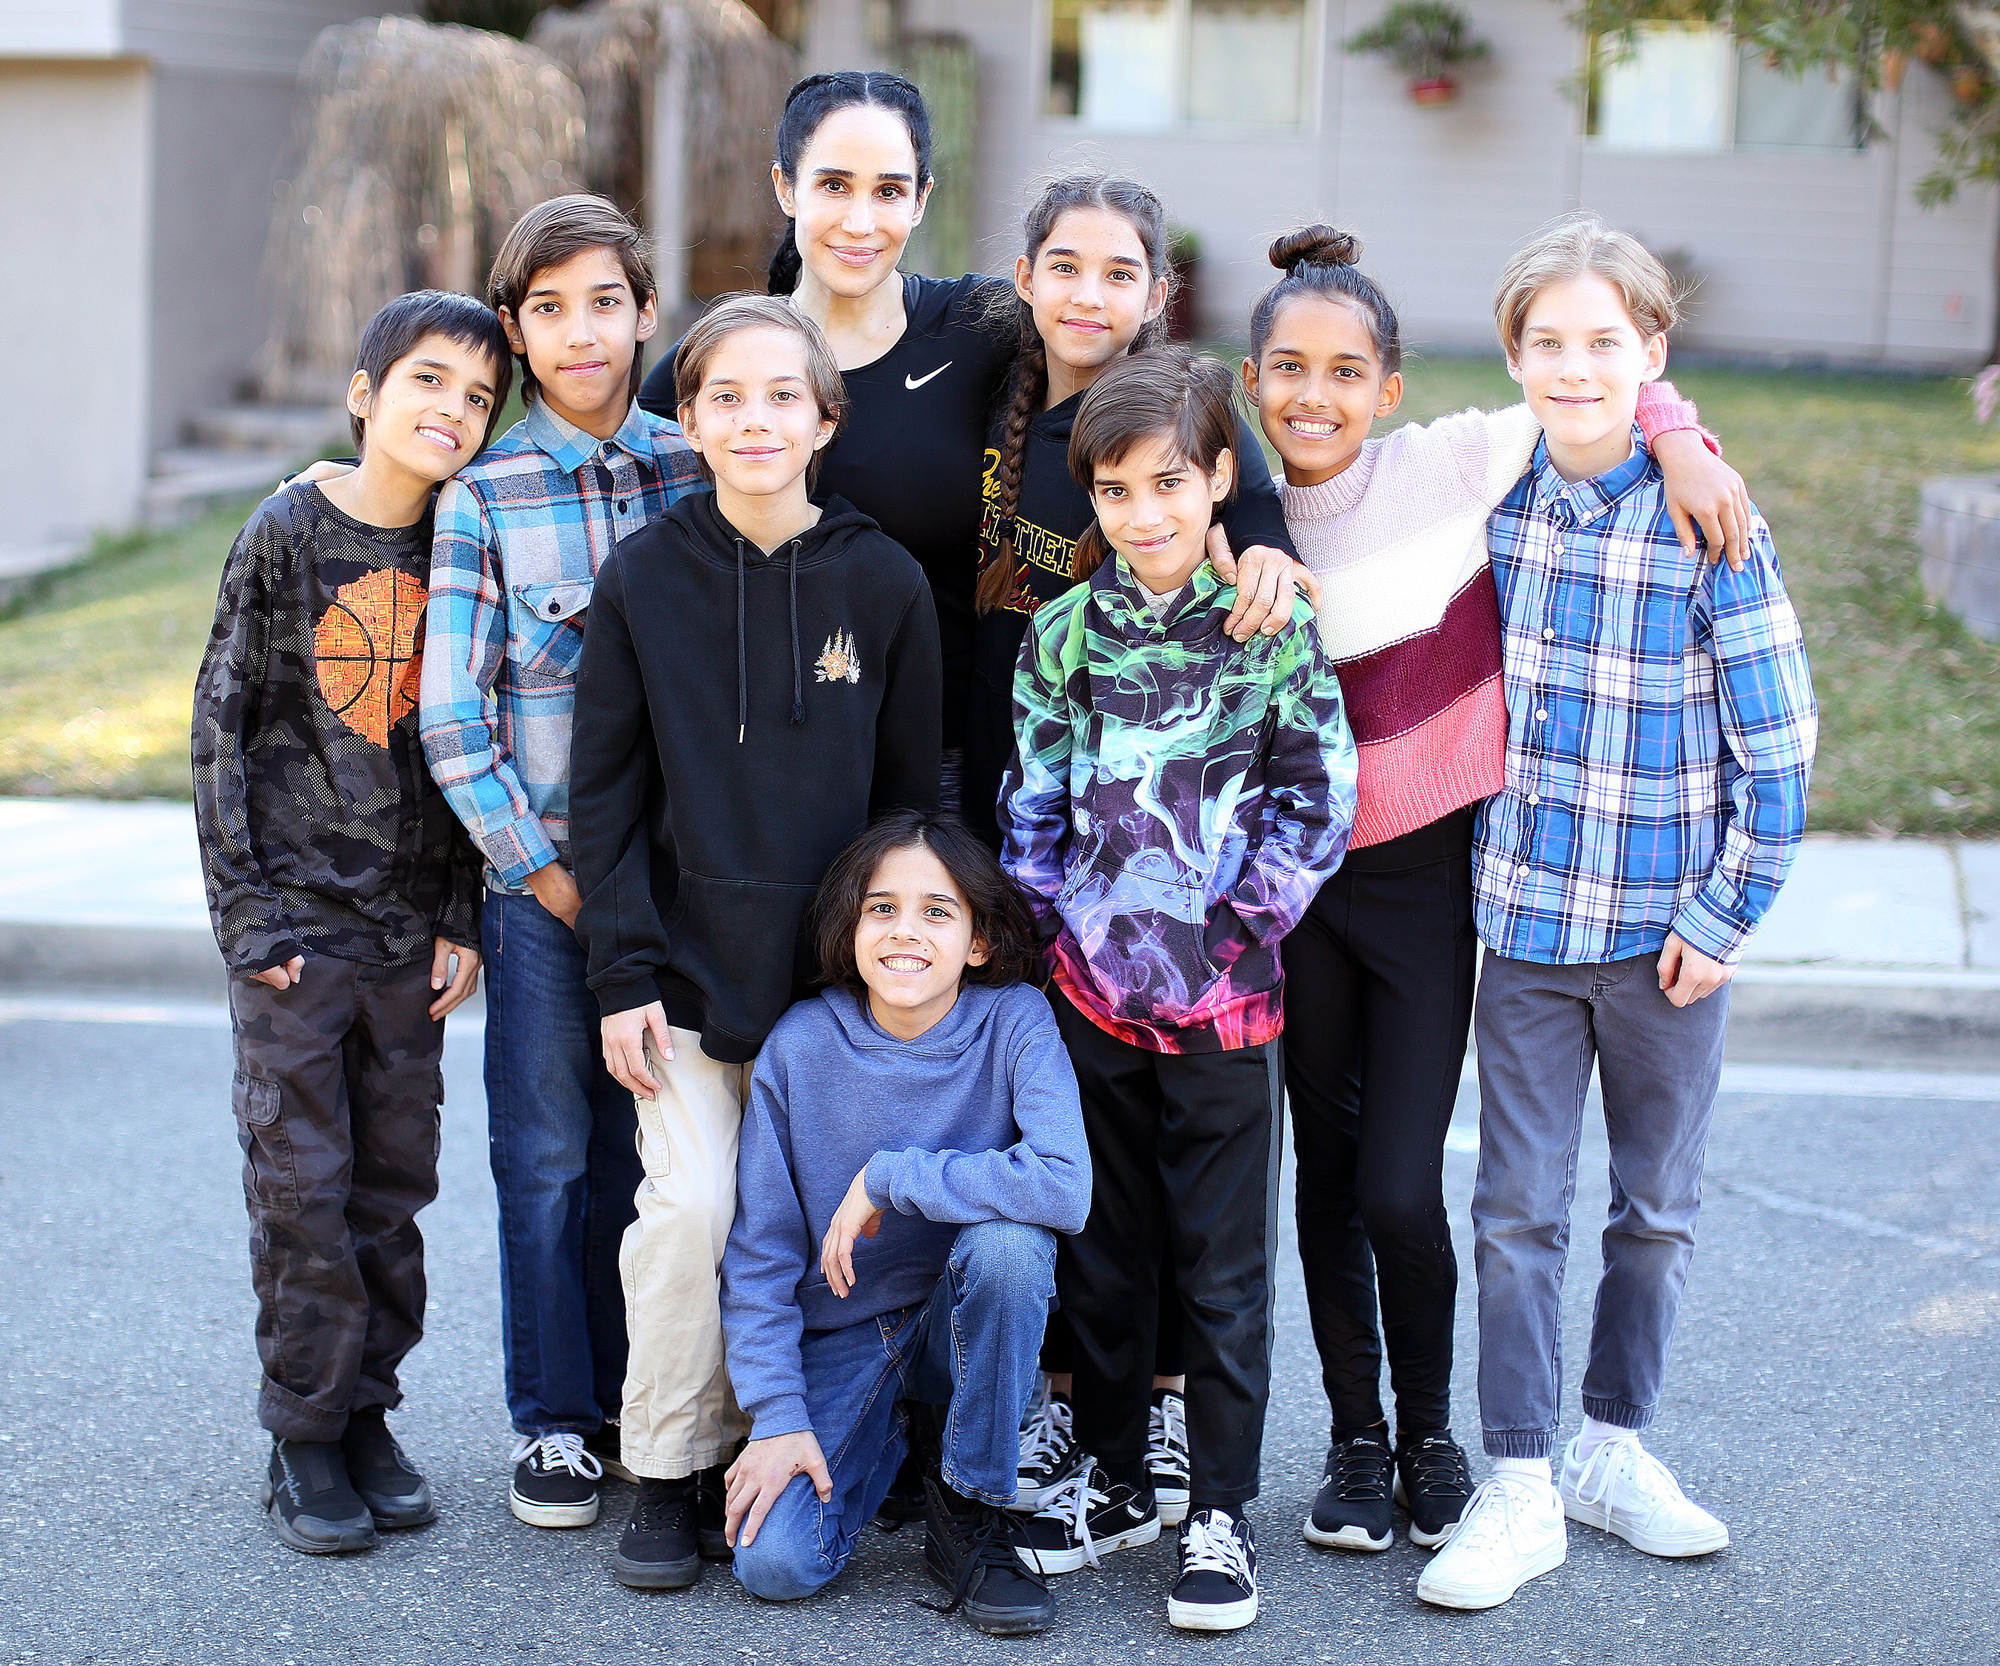 EXCLUSIVE: "Octomom' Natalie Suleman celebrates a belated birthday with her octuplets who just turned 13! The adorable family enjoyed a fun time at their local bowling alley before heading to a nearby park to enjoy some vegan cupcakes and playtime in Laguna Niguel,CA. 07 Feb 2022 Pictured: Natalie Suleman & Octuplets.